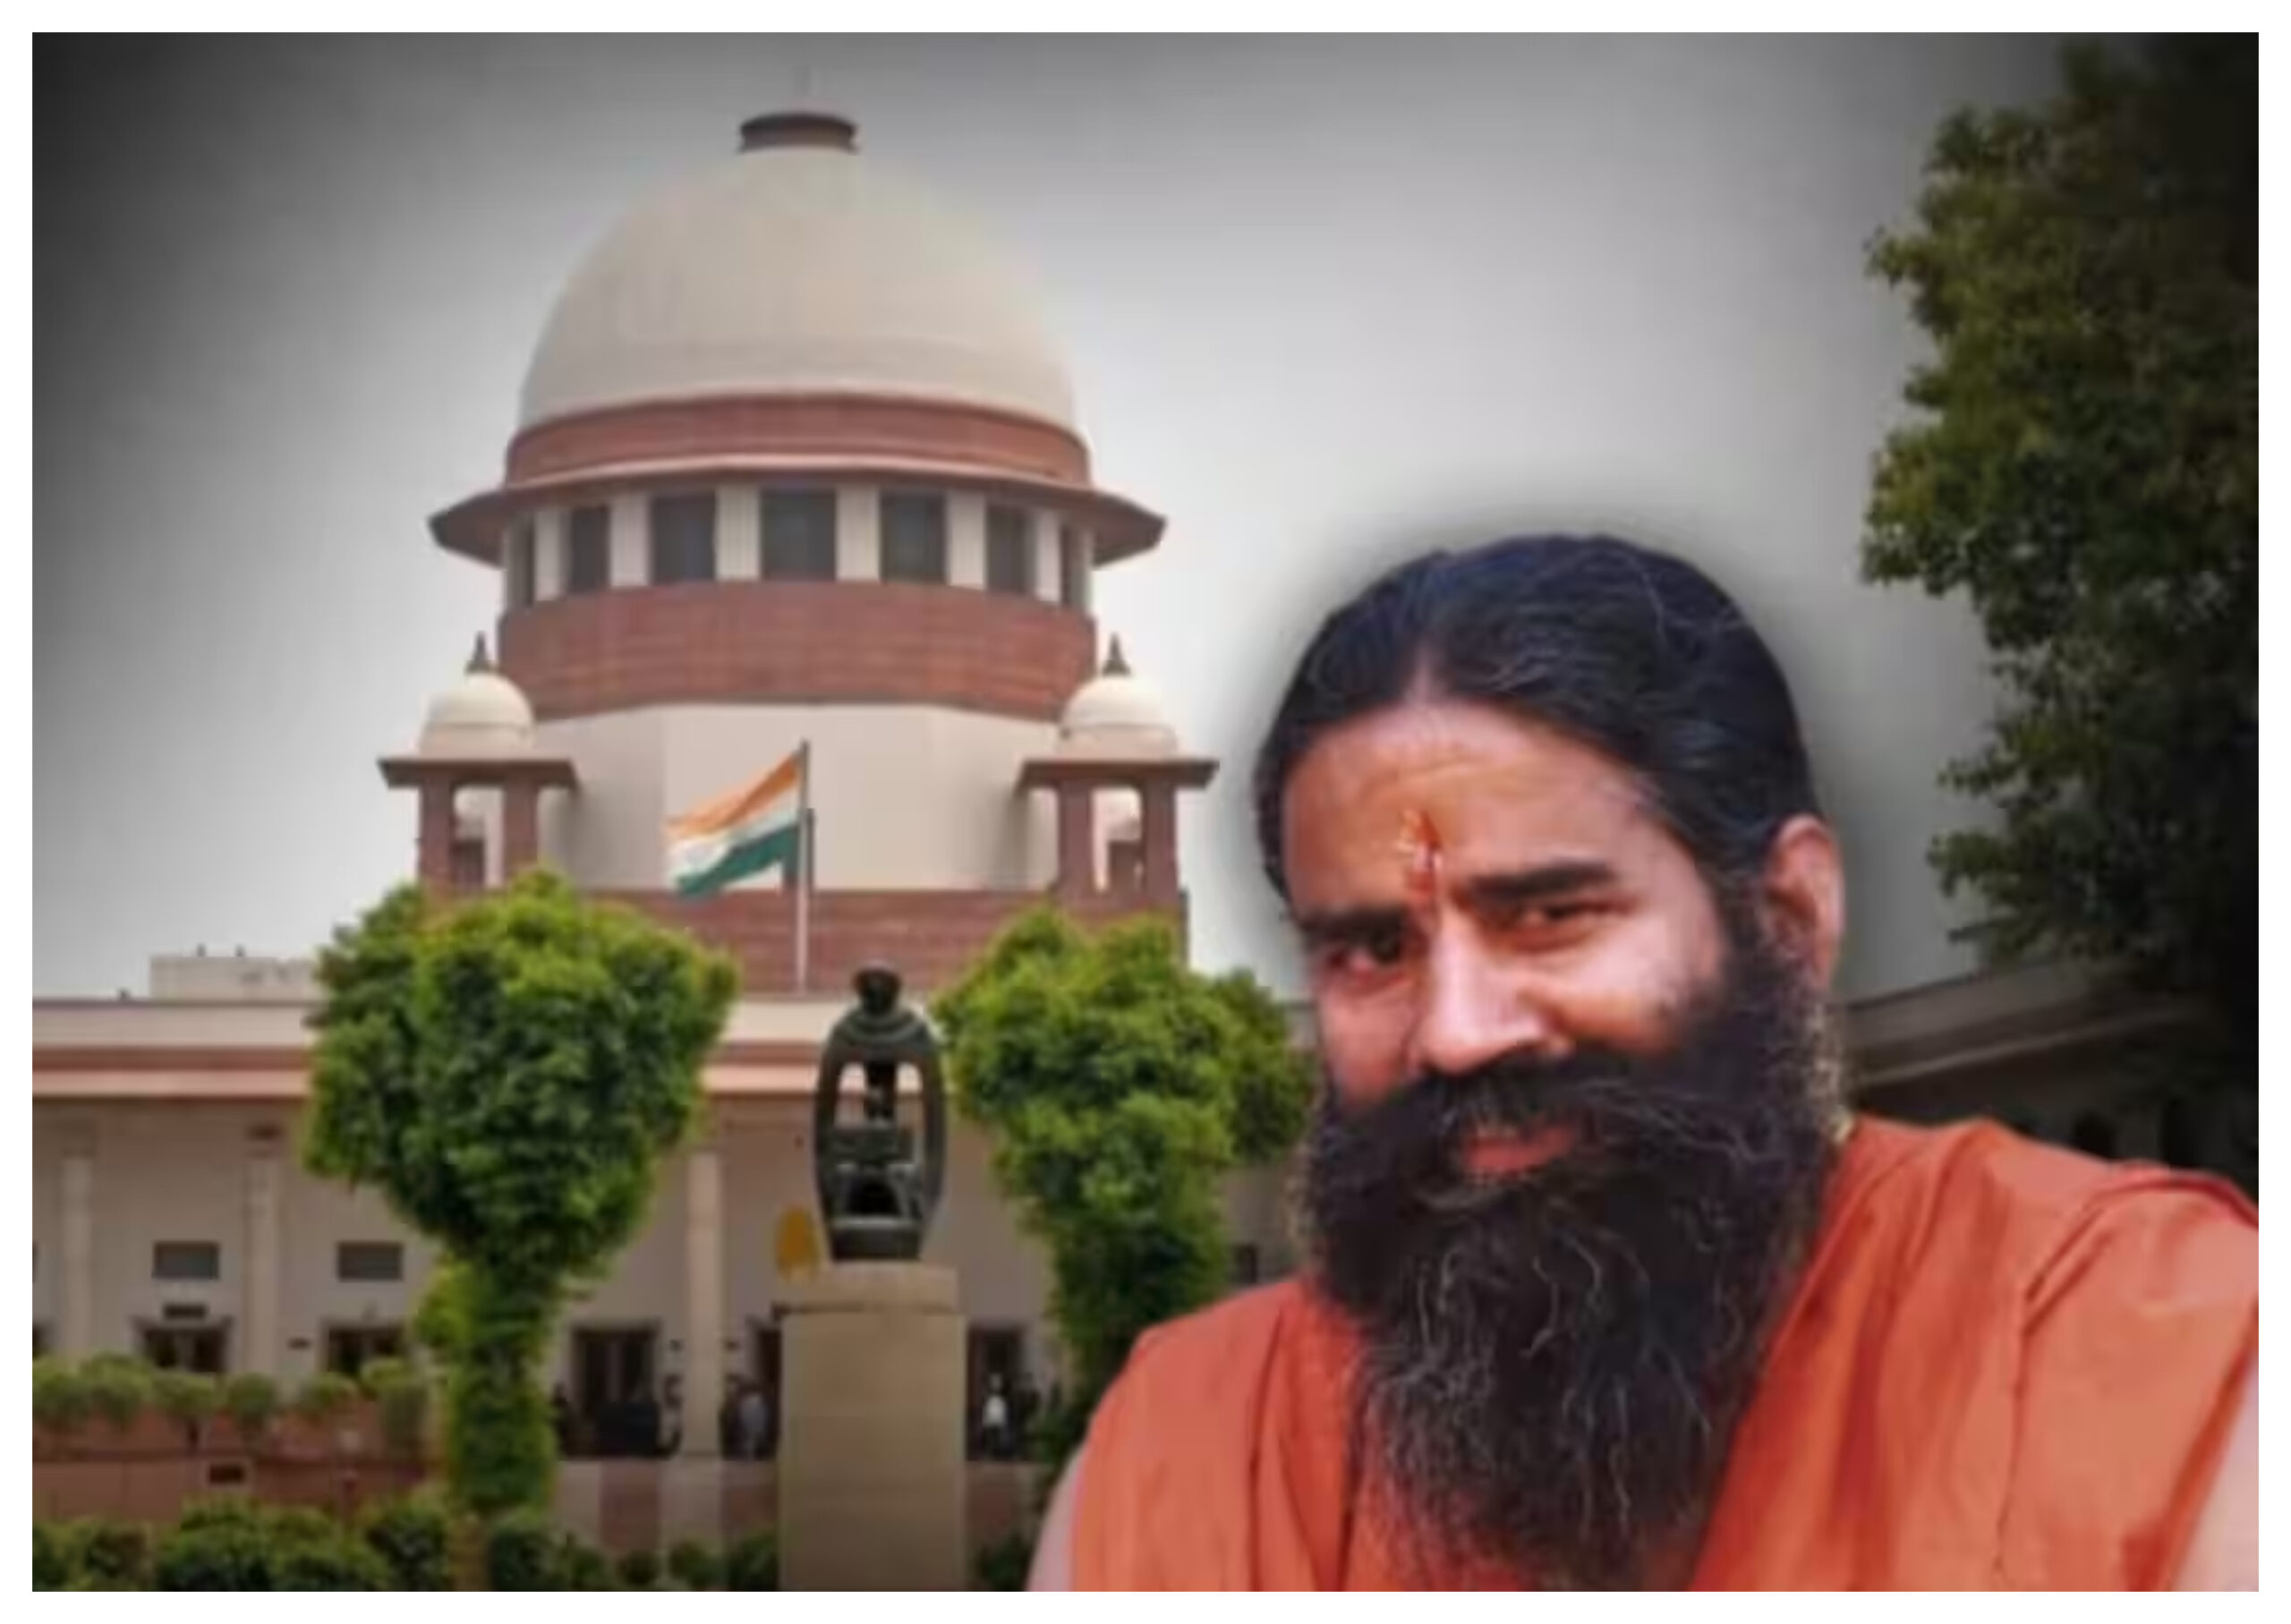 Patanjali: Dr. Babu KV said he is happy with the Supreme Court's decision against Patanjali. Due to the continuous efforts of Dr. Babu KV of Jammu and Kashmir, the Supreme Court has taken major action against Yoga Guru Ramdev's company Patanjali.